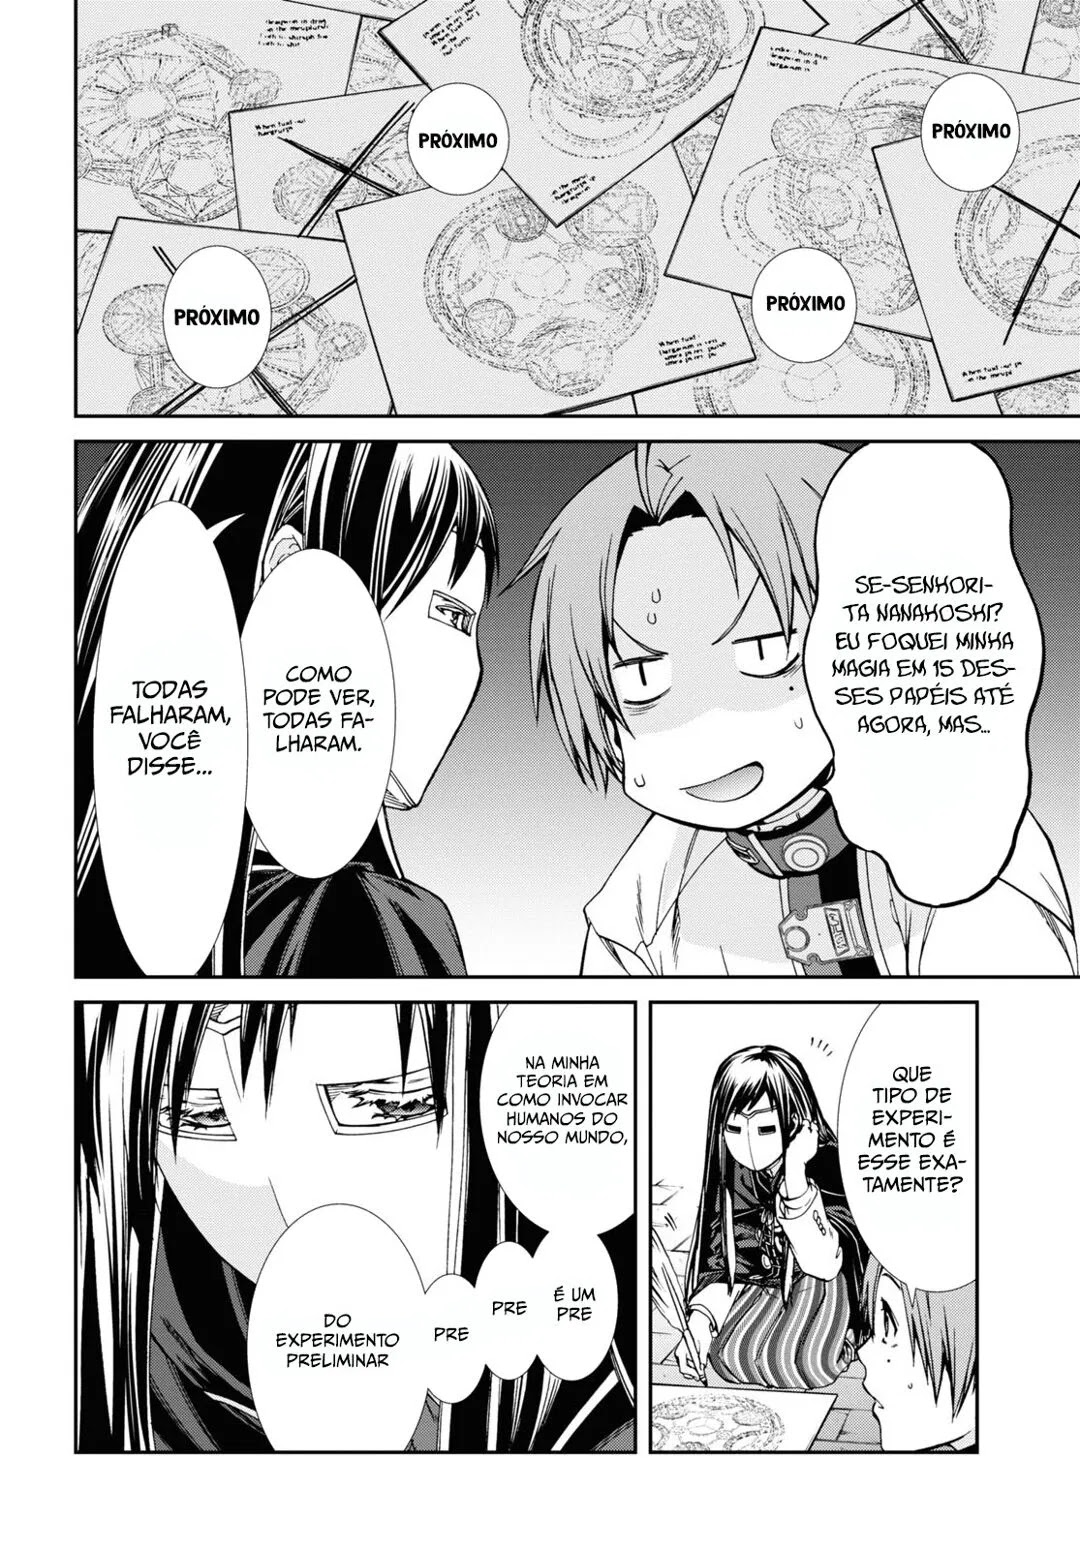 Classroom of the Elite, Chapter 70 - Classroom of the Elite Manga Online